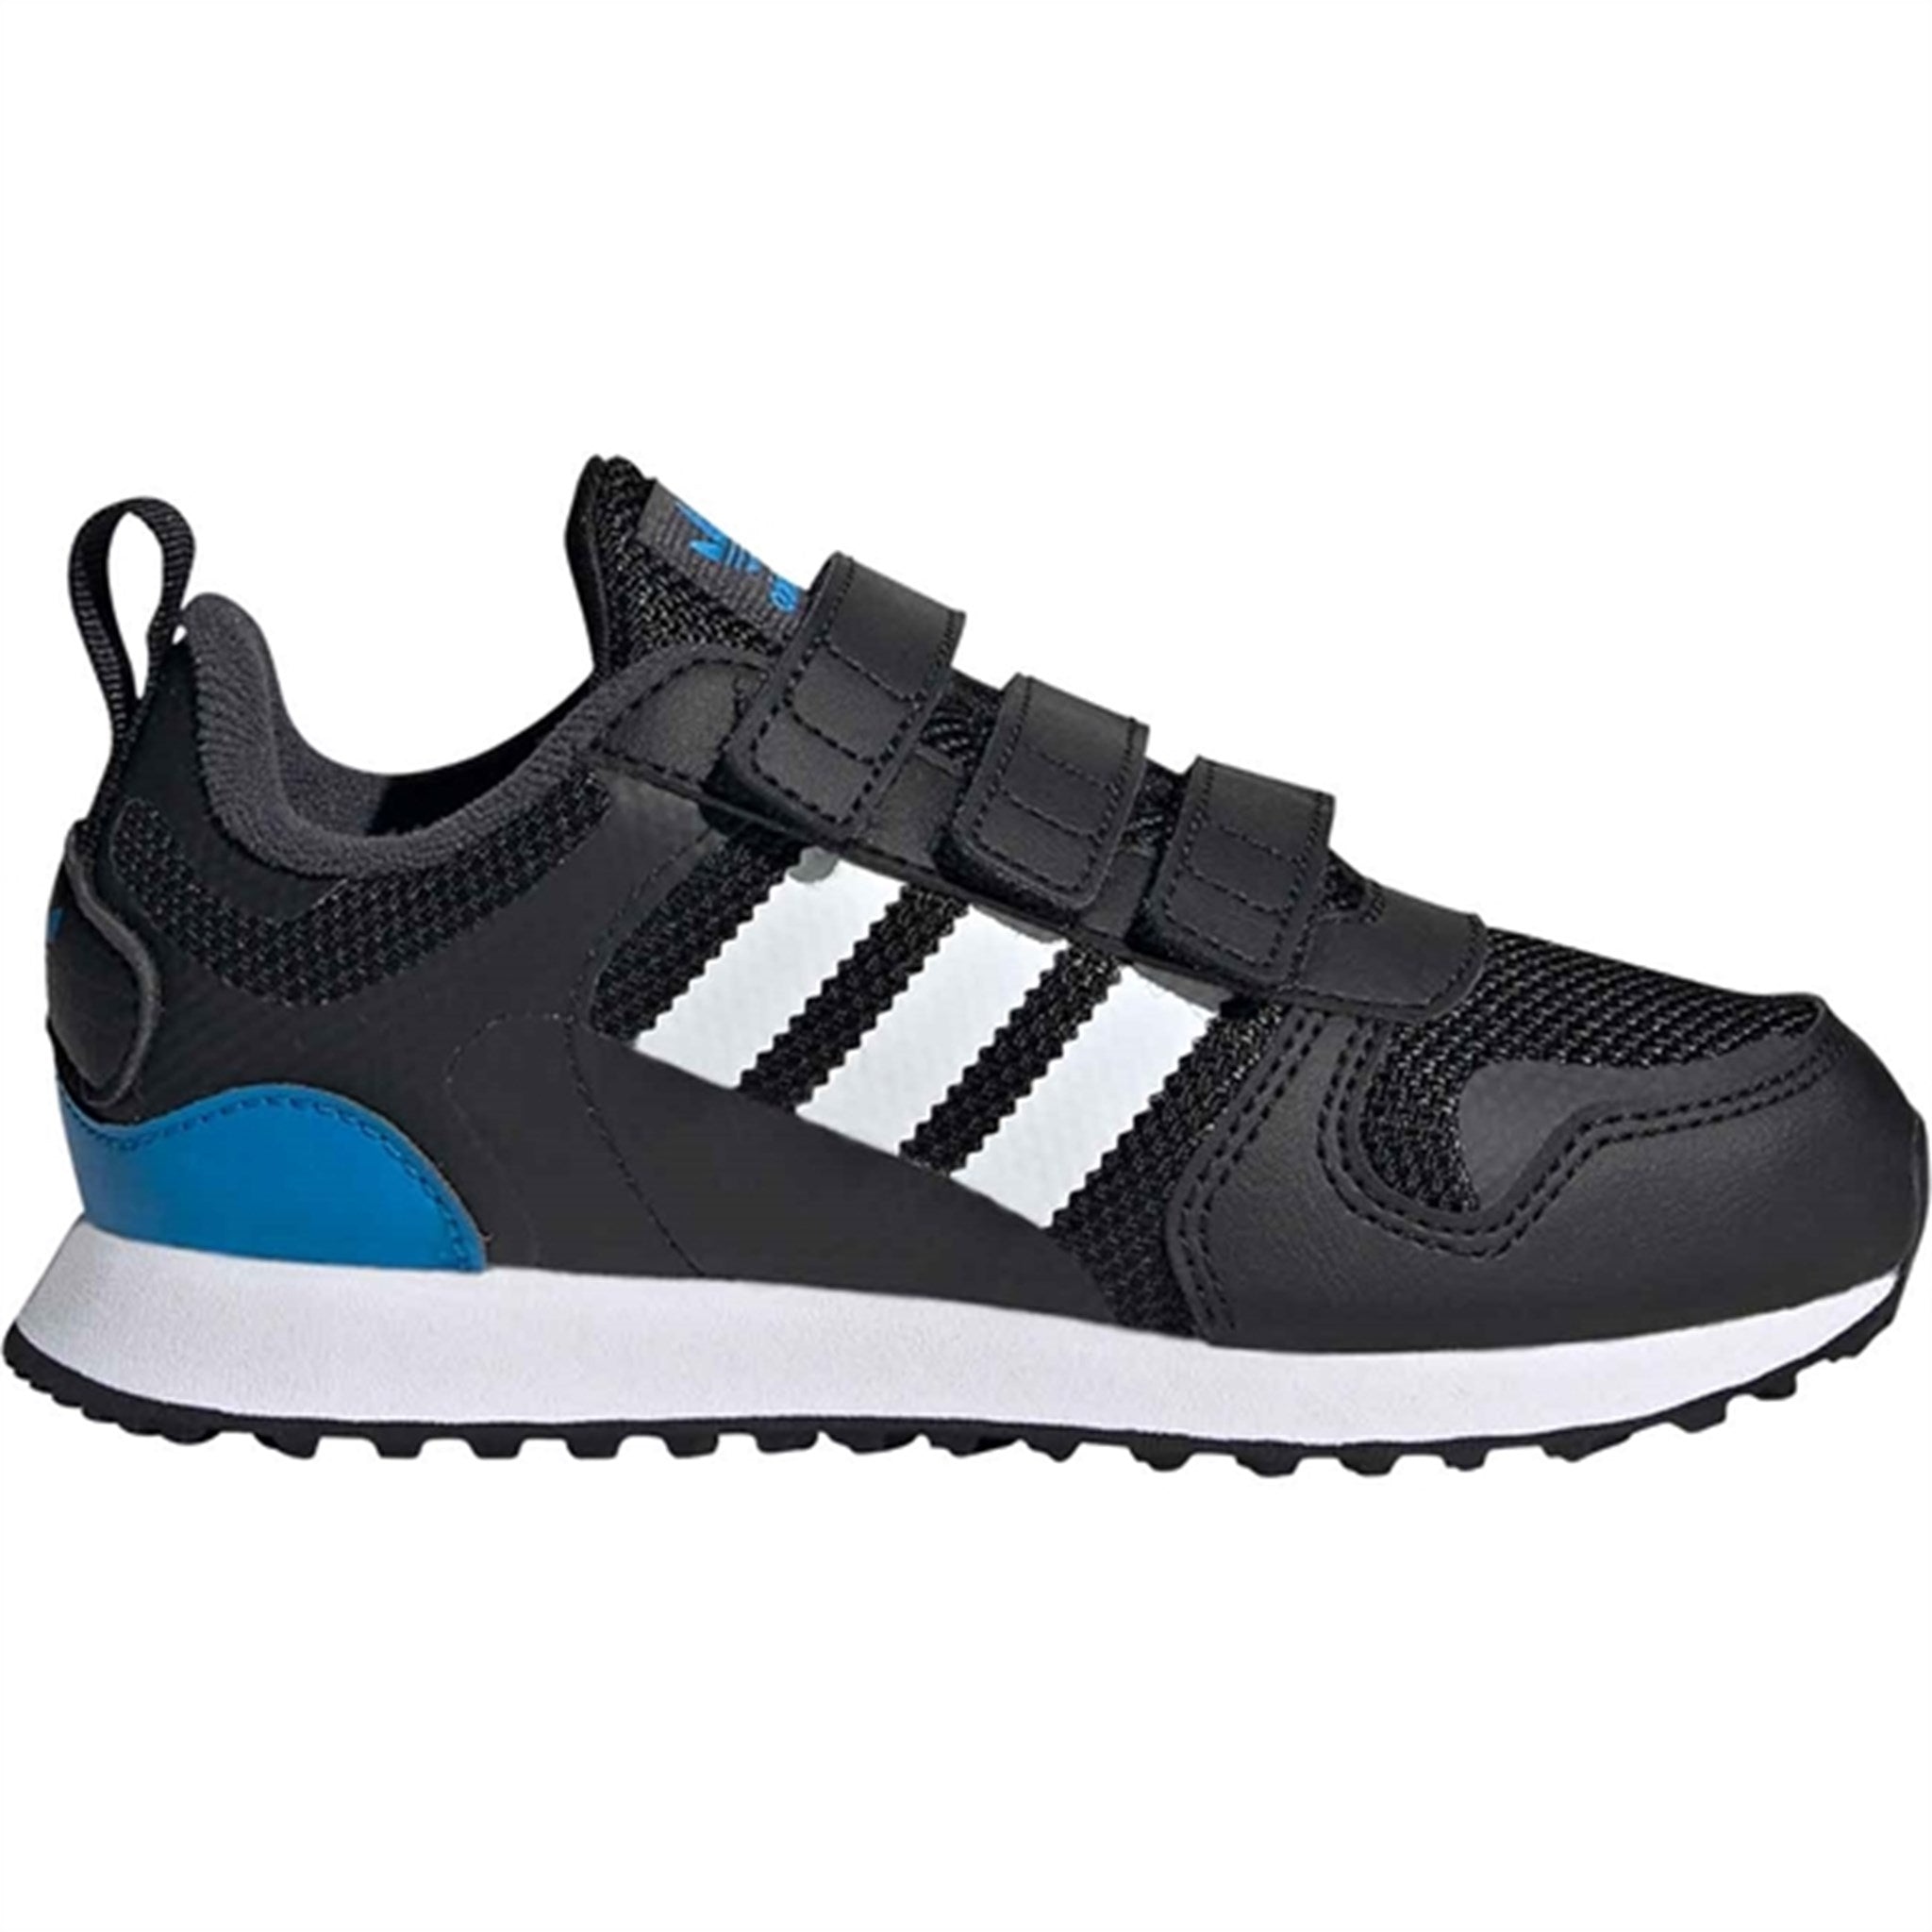 adidas ZX 700 HD Sneakers Black White Carbon